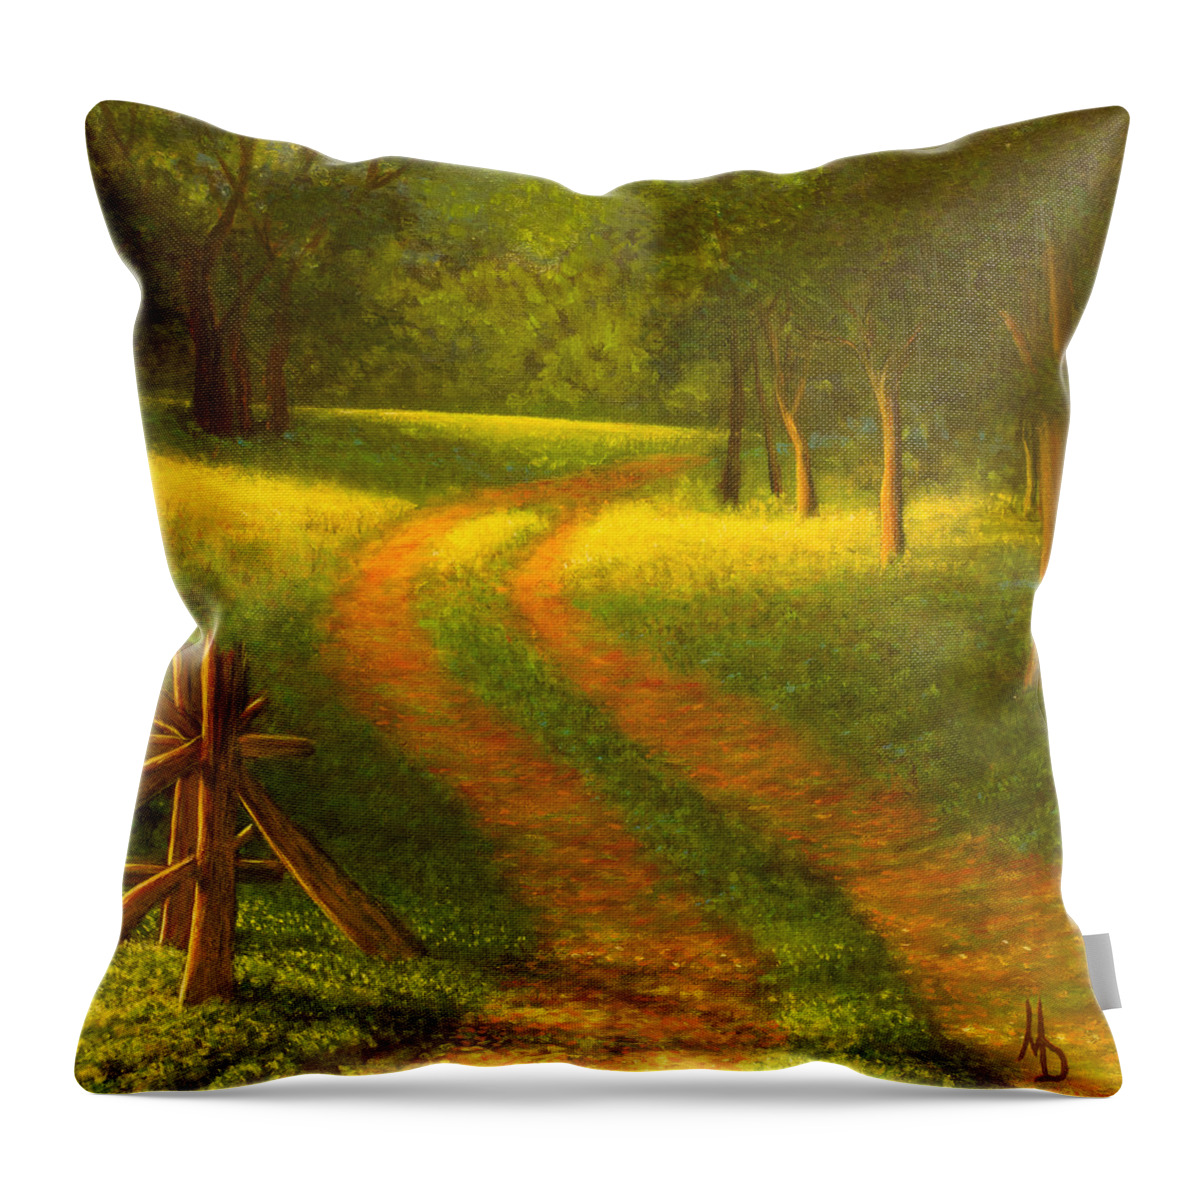 Country Lane Throw Pillow featuring the painting Country Lane by Marc Dmytryshyn